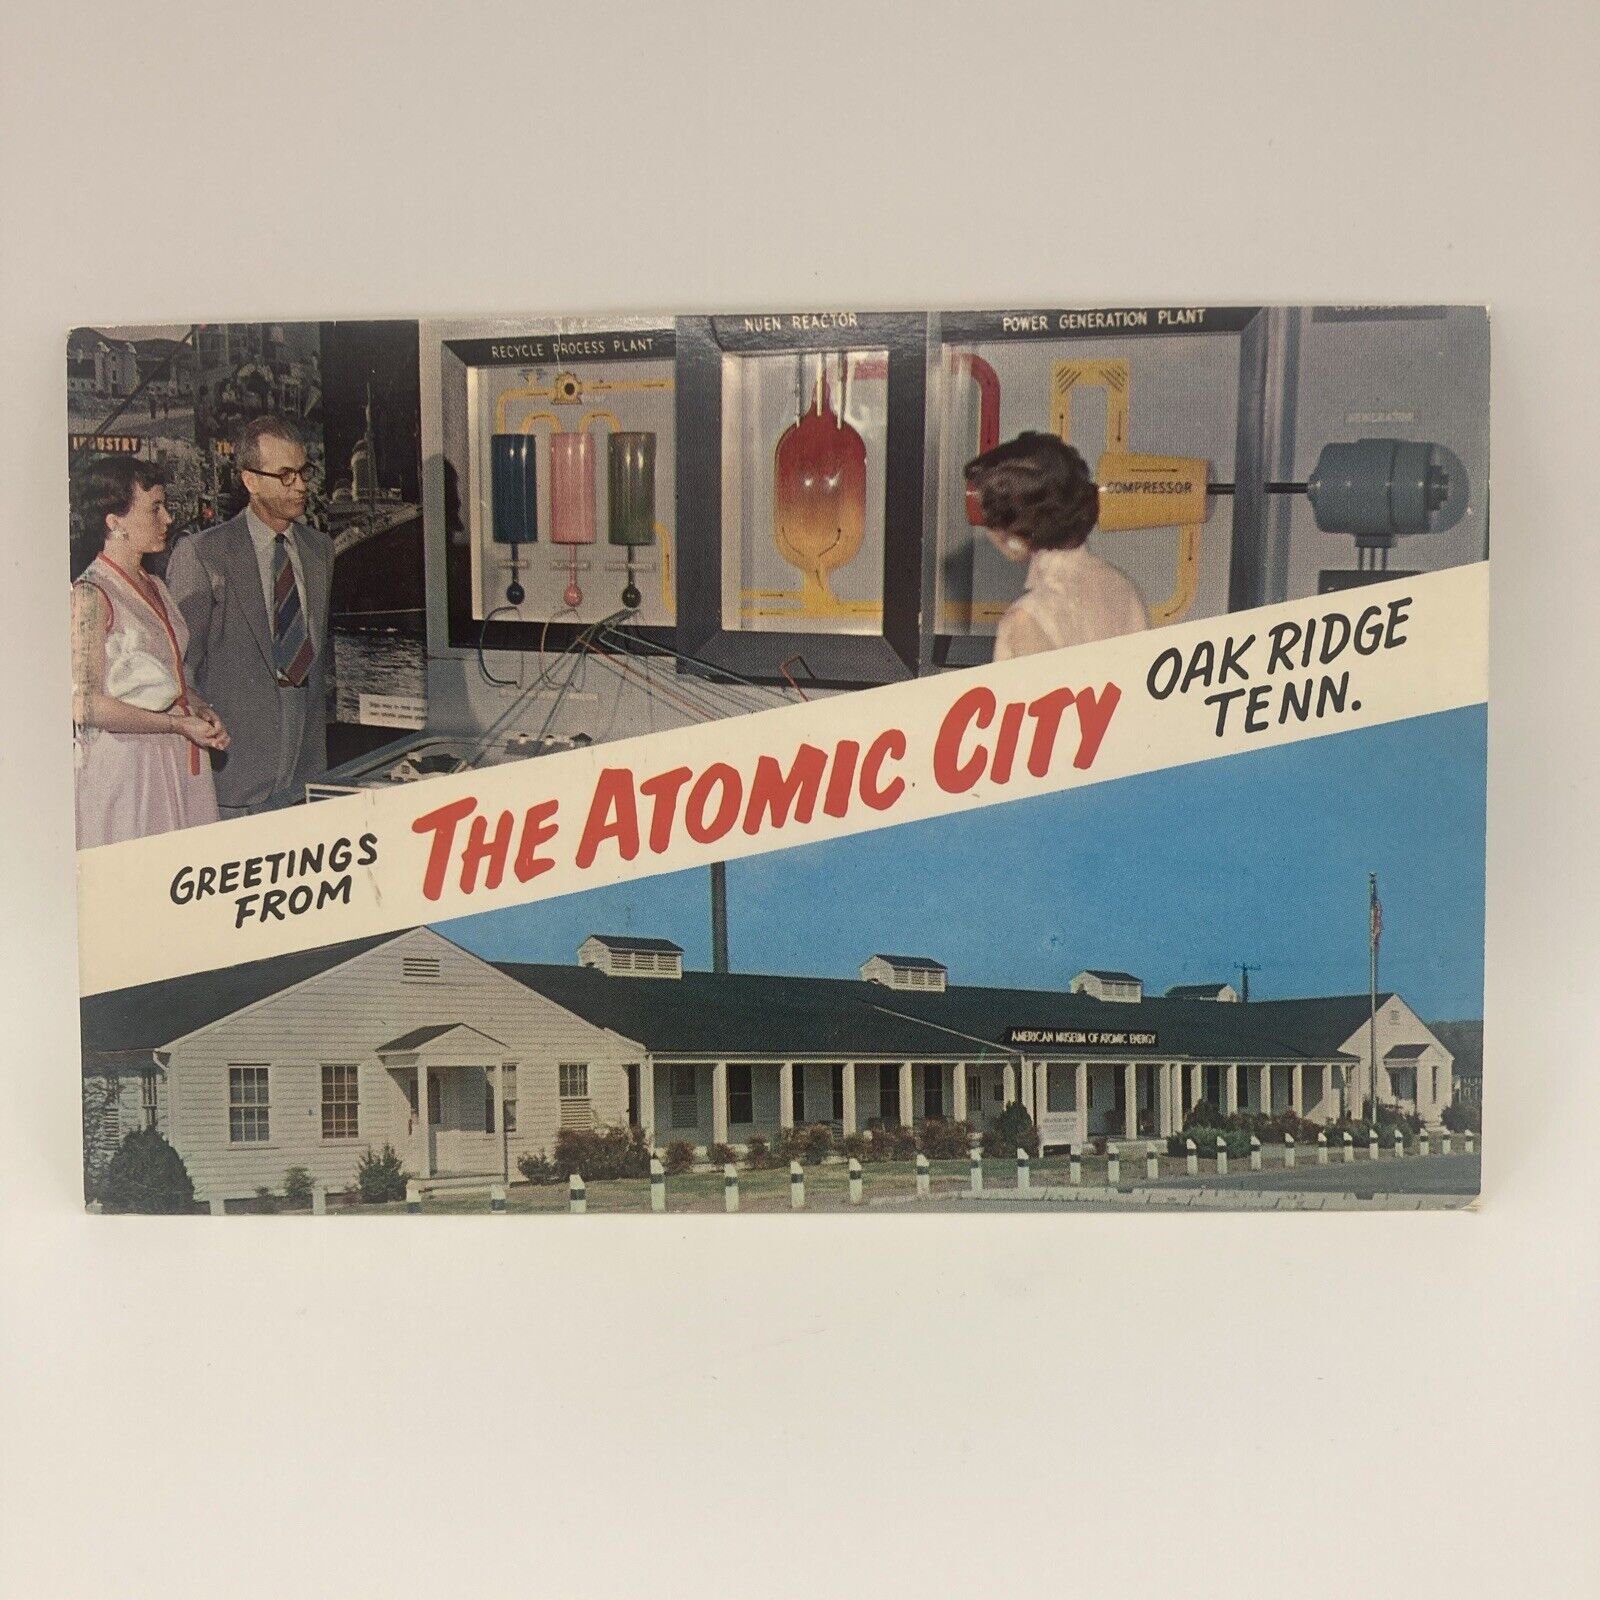 Postcard Greetings From The Atomic City, Oak Ridge Tennessee 